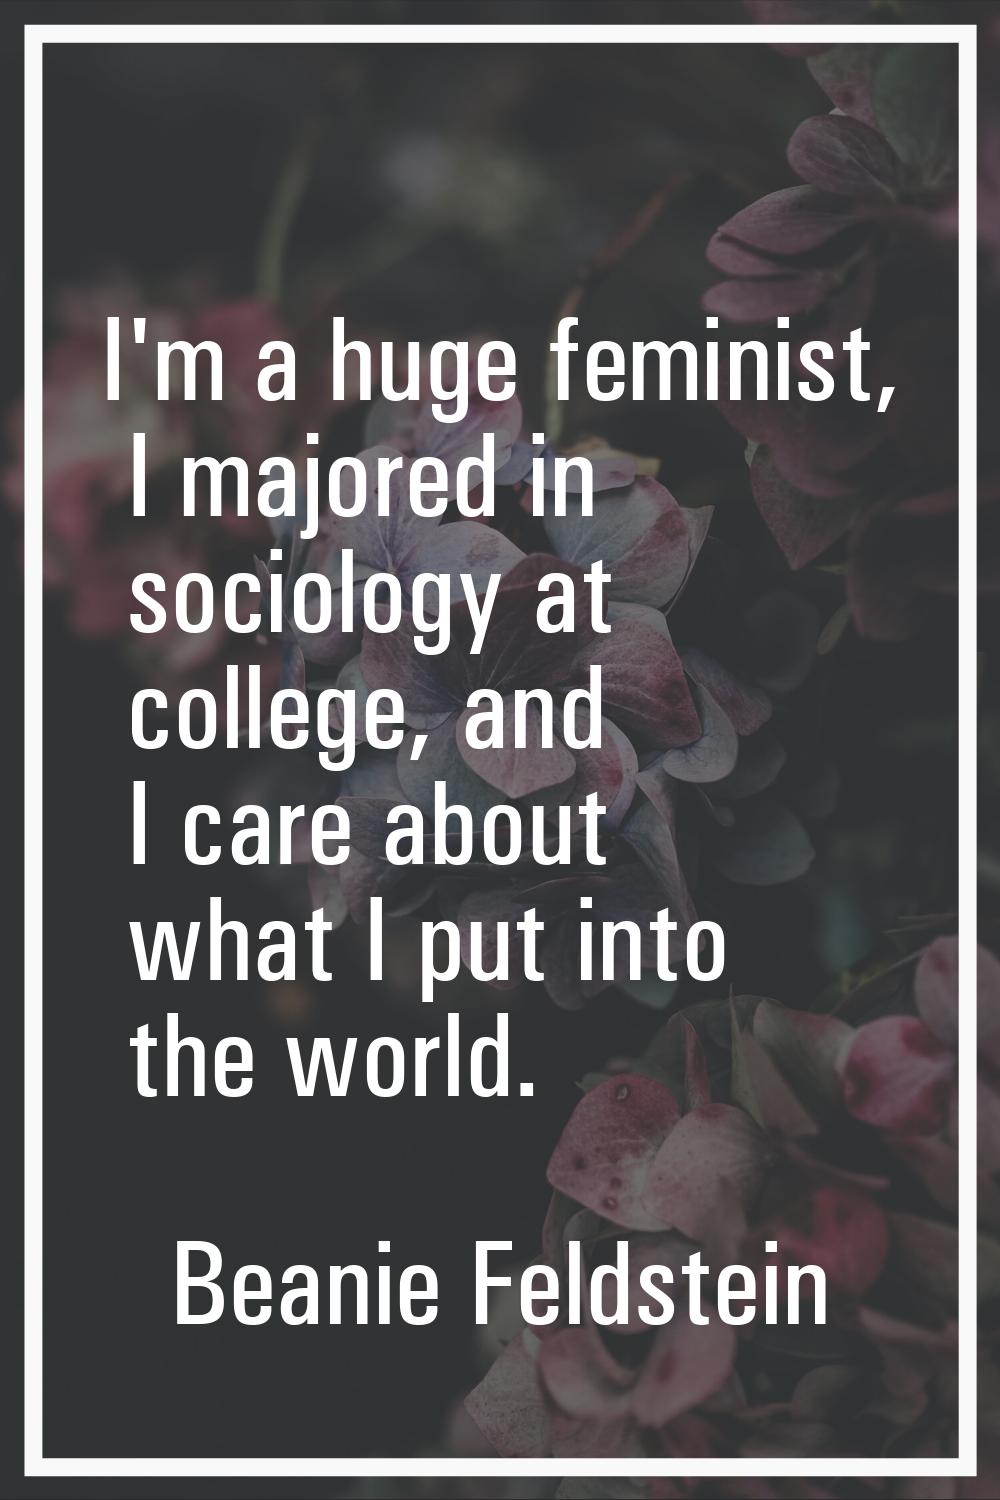 I'm a huge feminist, I majored in sociology at college, and I care about what I put into the world.